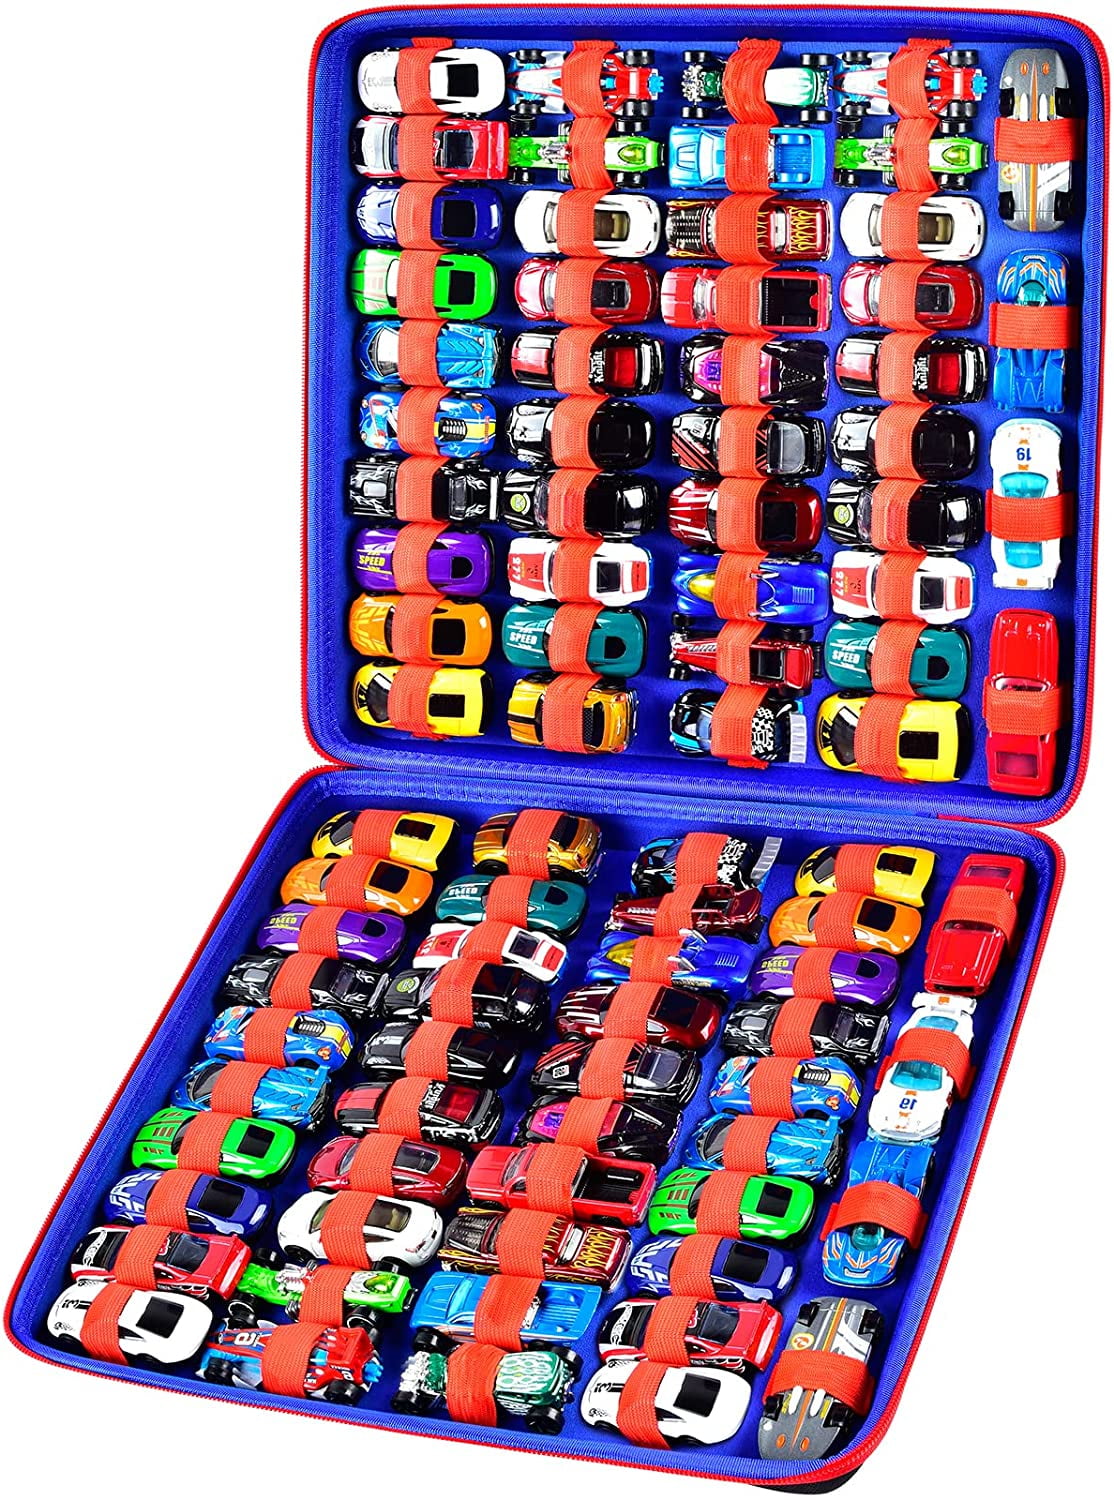 COMECASE 88 Toy Cars Storage Organizer Case for Matchbox Car (Black Box  Only)